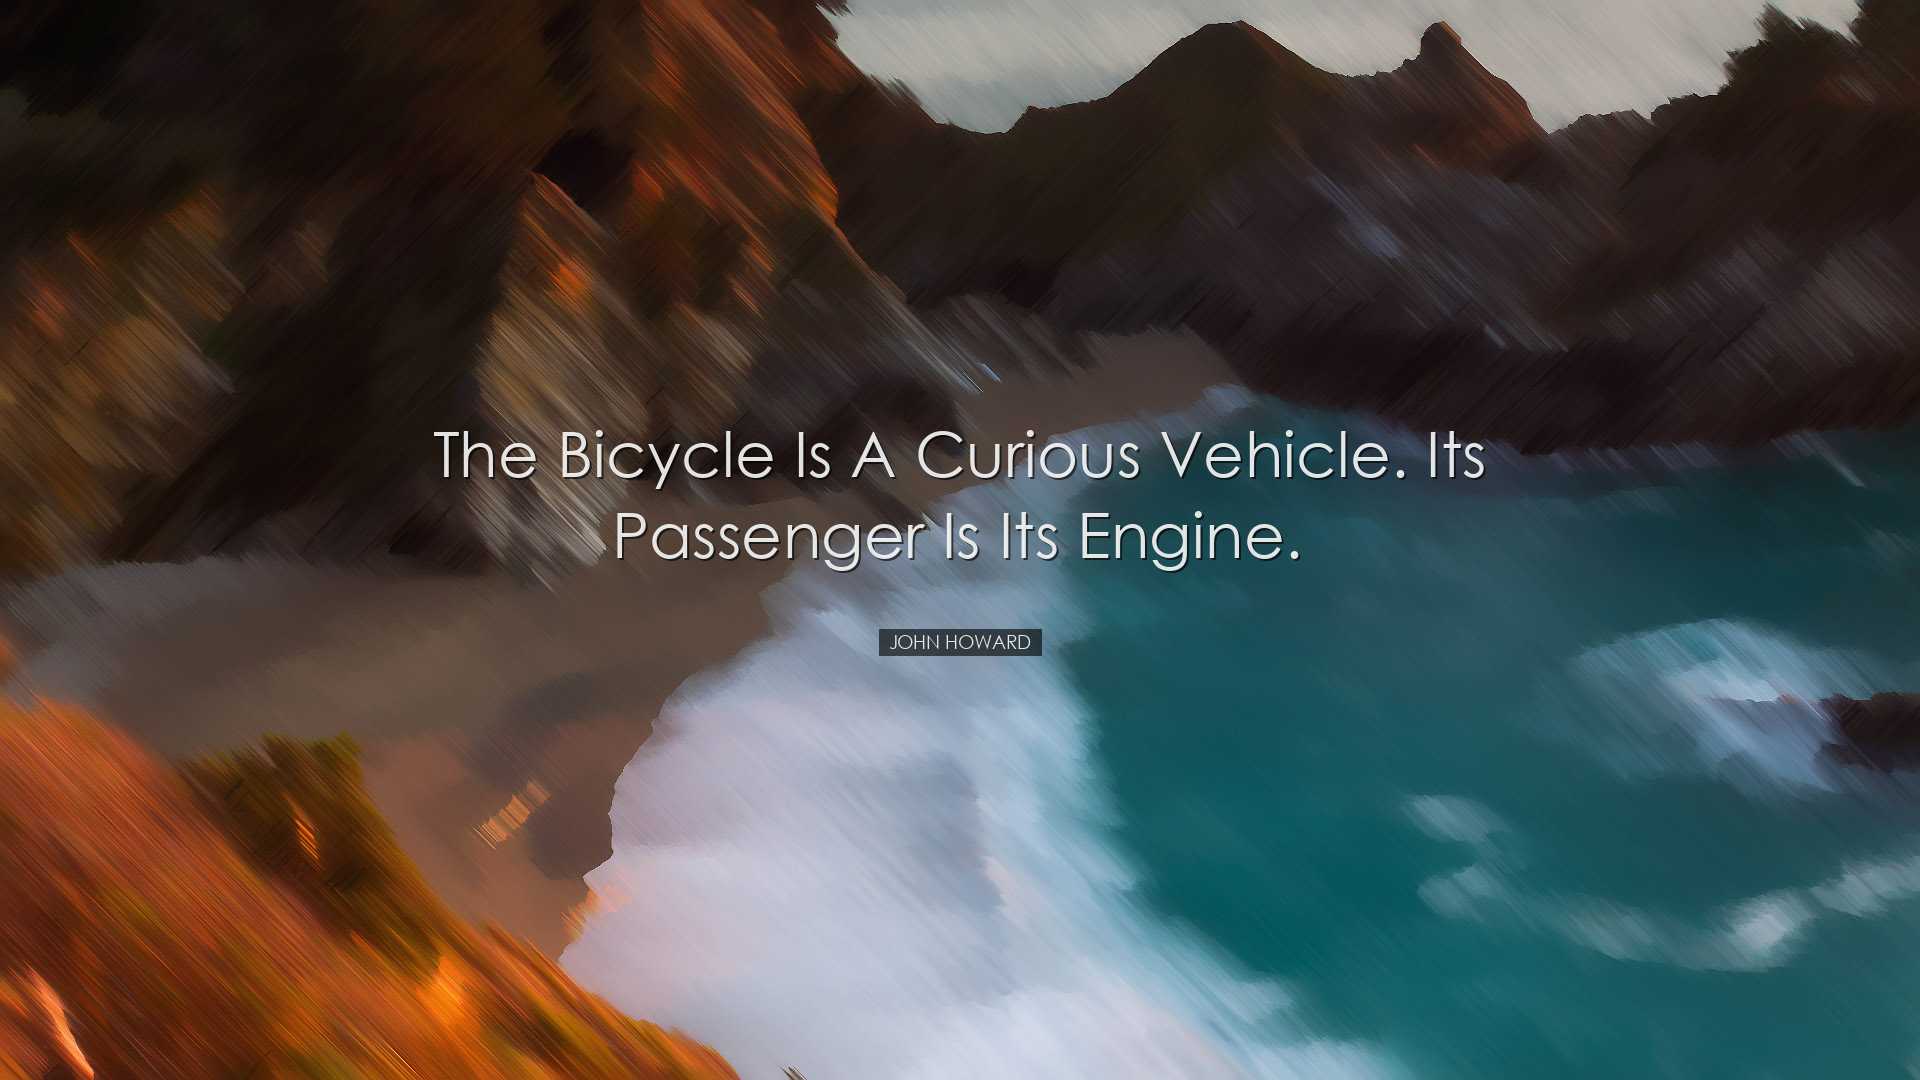 The bicycle is a curious vehicle. Its passenger is its engine. - J